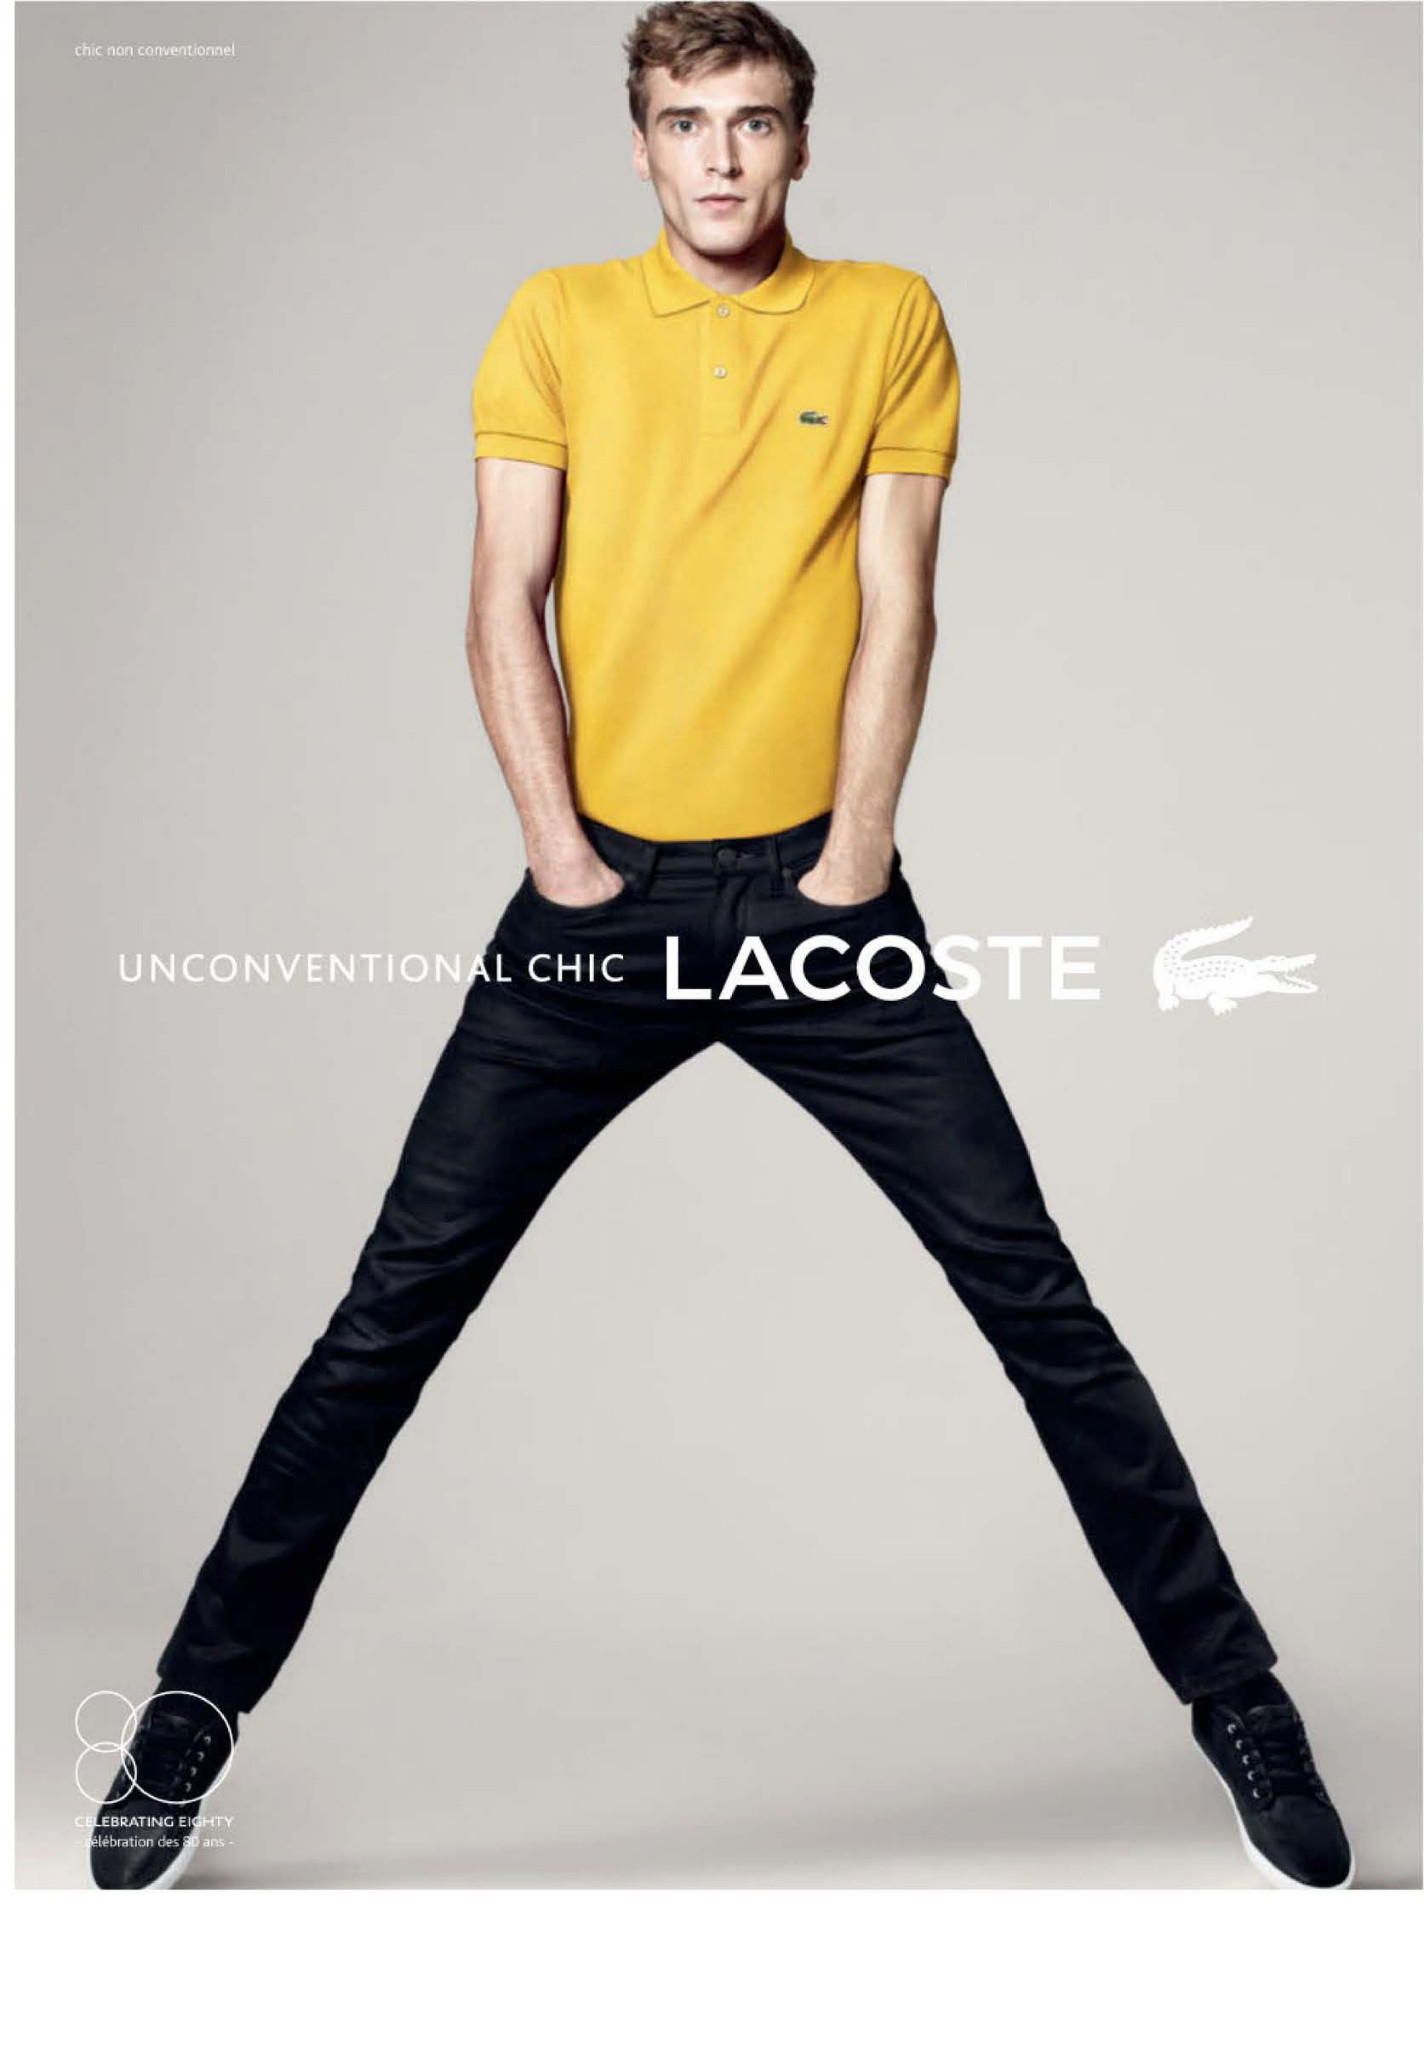 Clement Chabernaud for Lacoste´s Spring/Summer 2013 Campaign